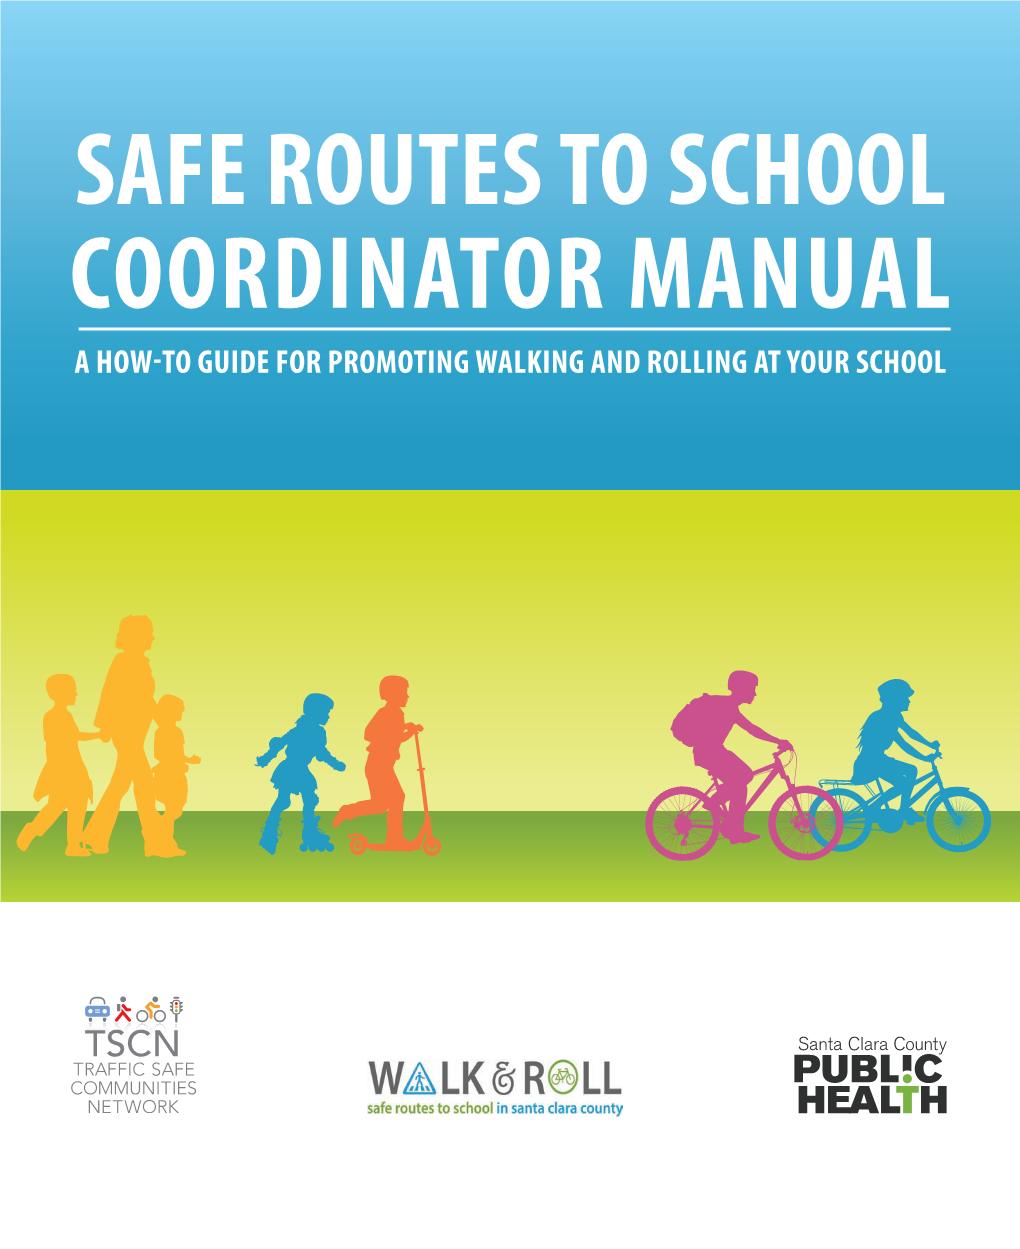 Safe Routes to School Coordinator Manual a How-To Guide for Promoting Walking and Rolling at Your School